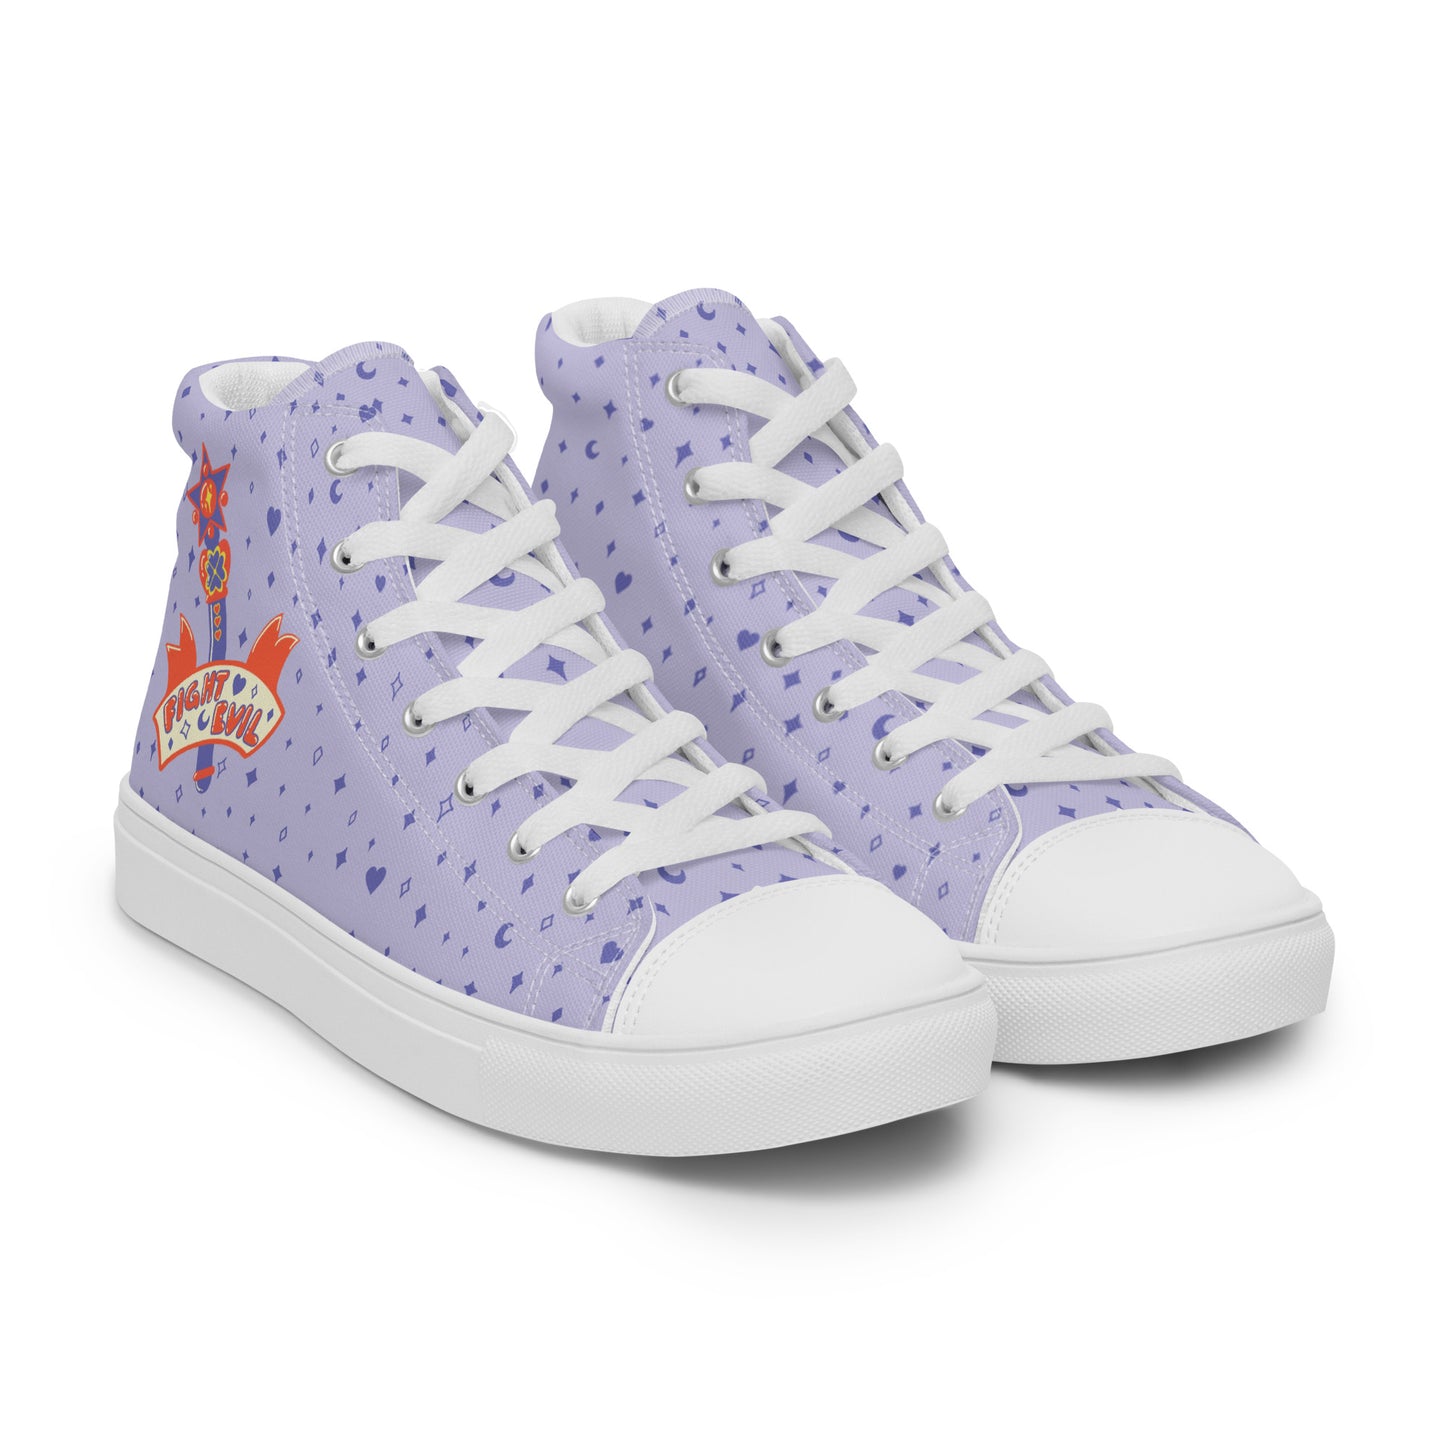 Magical Bitch Energy high top canvas shoes - Women